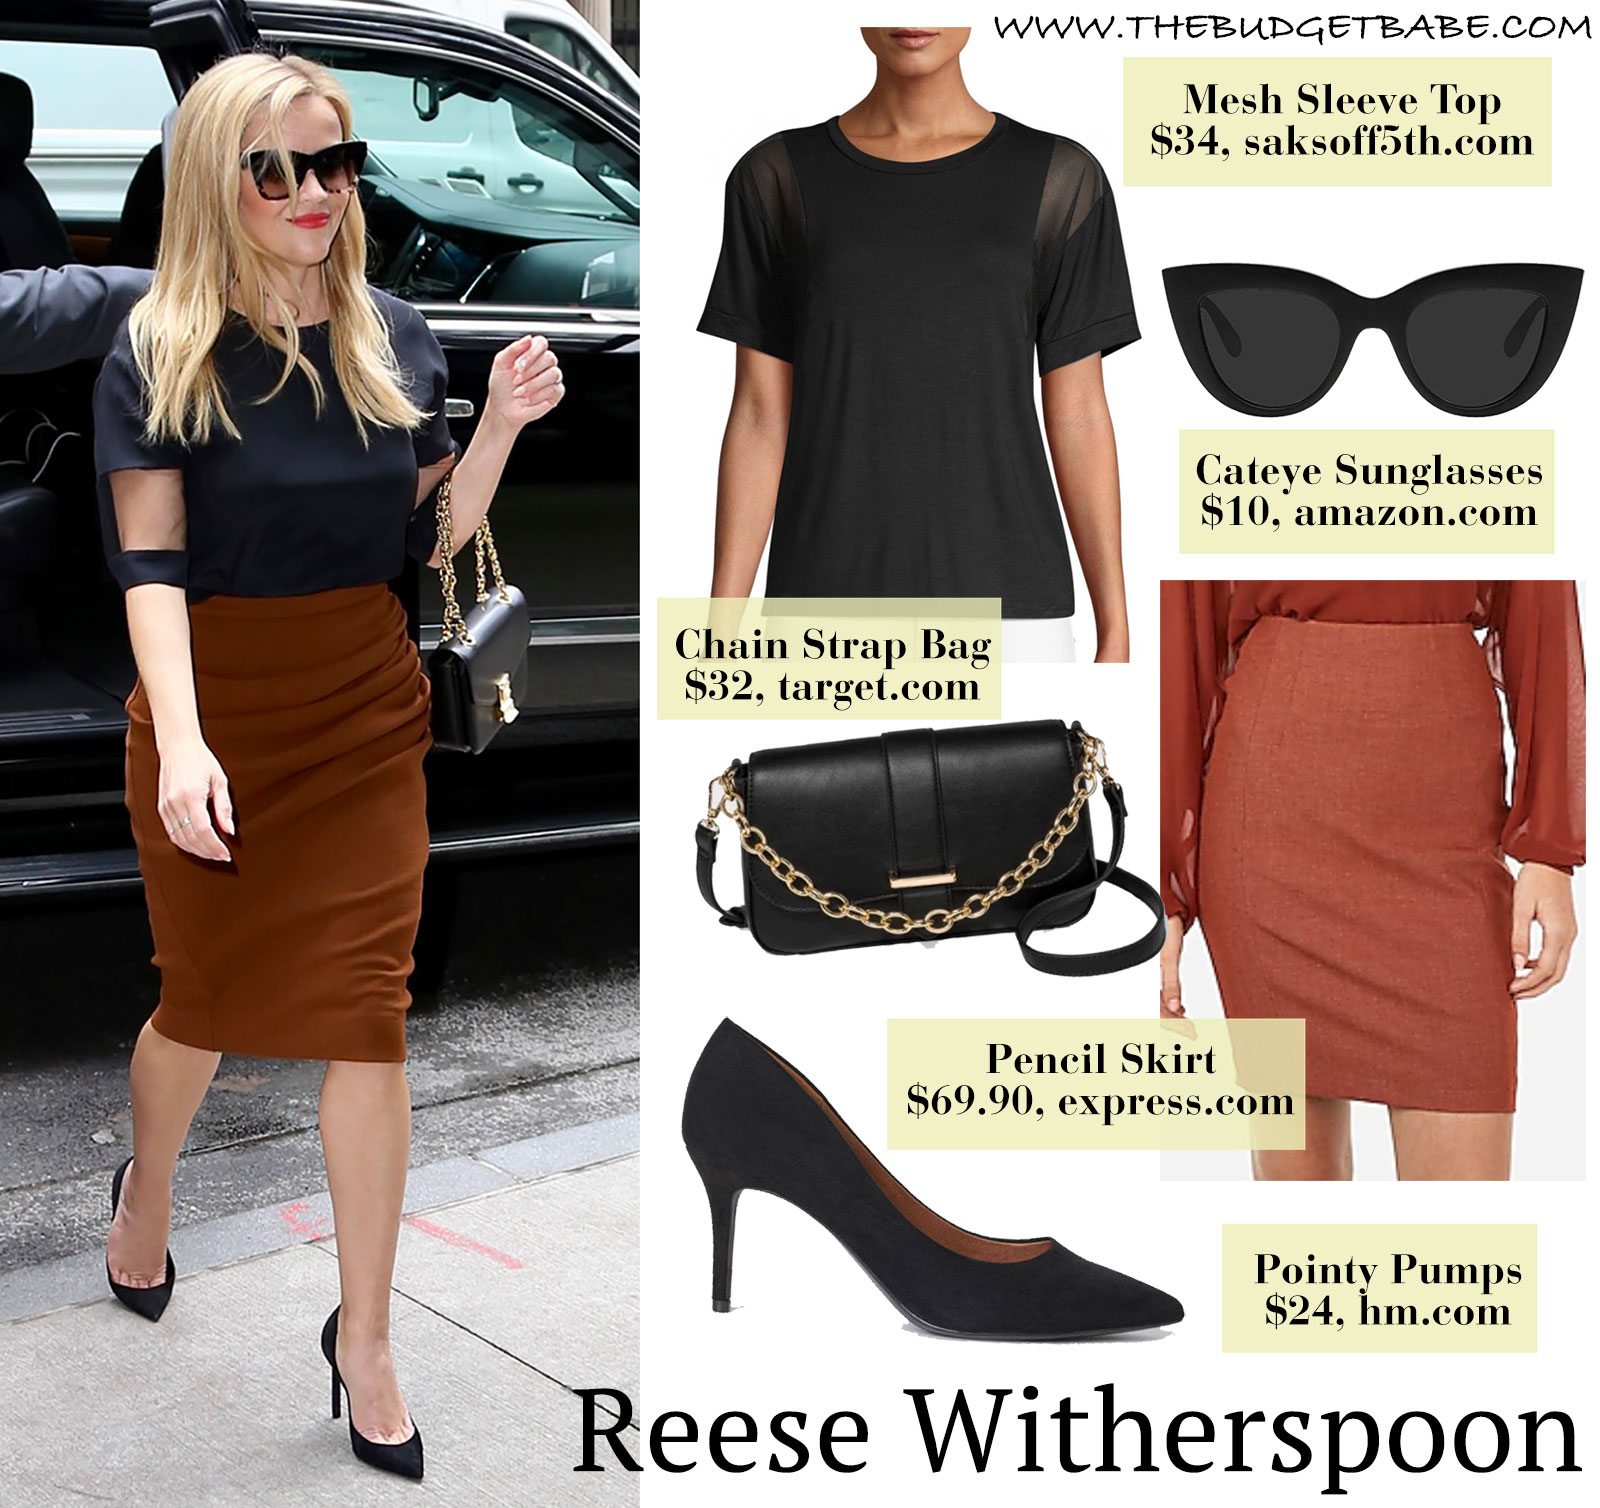 Reese Witherspoon's orange skirt and black top with mesh panels